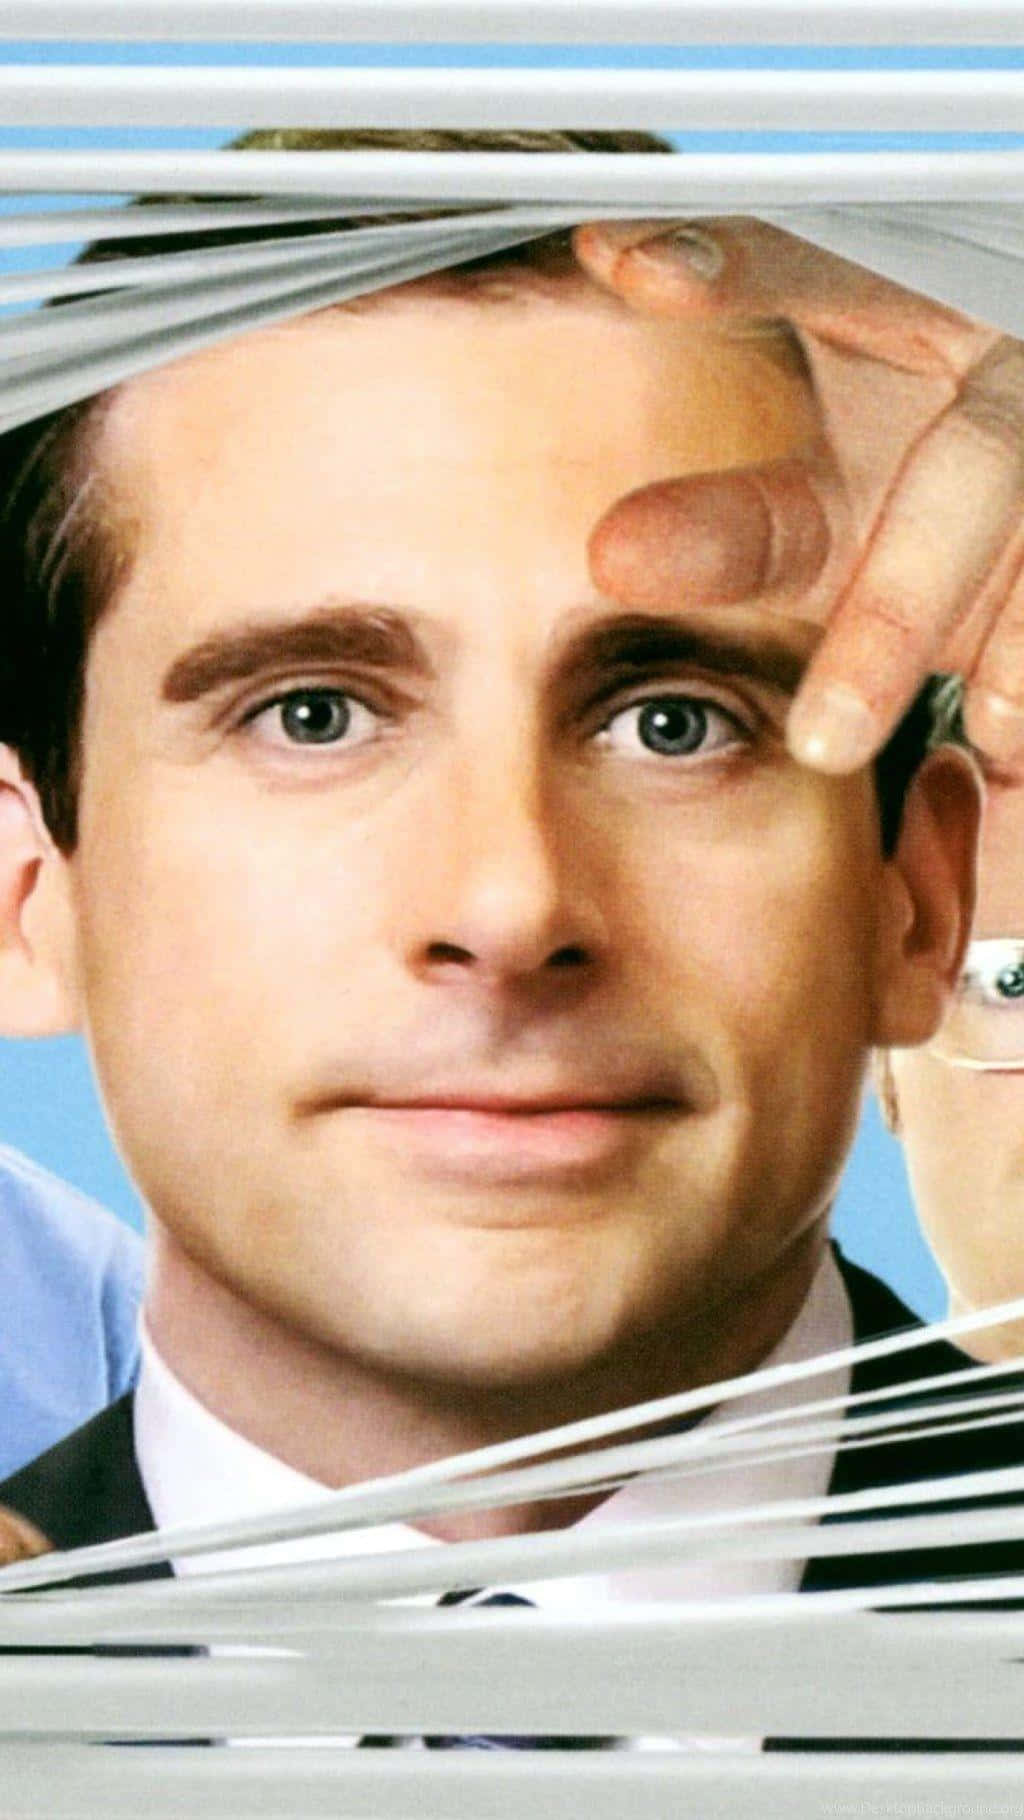 Steve Carell doing what he does best - making people laugh." Wallpaper